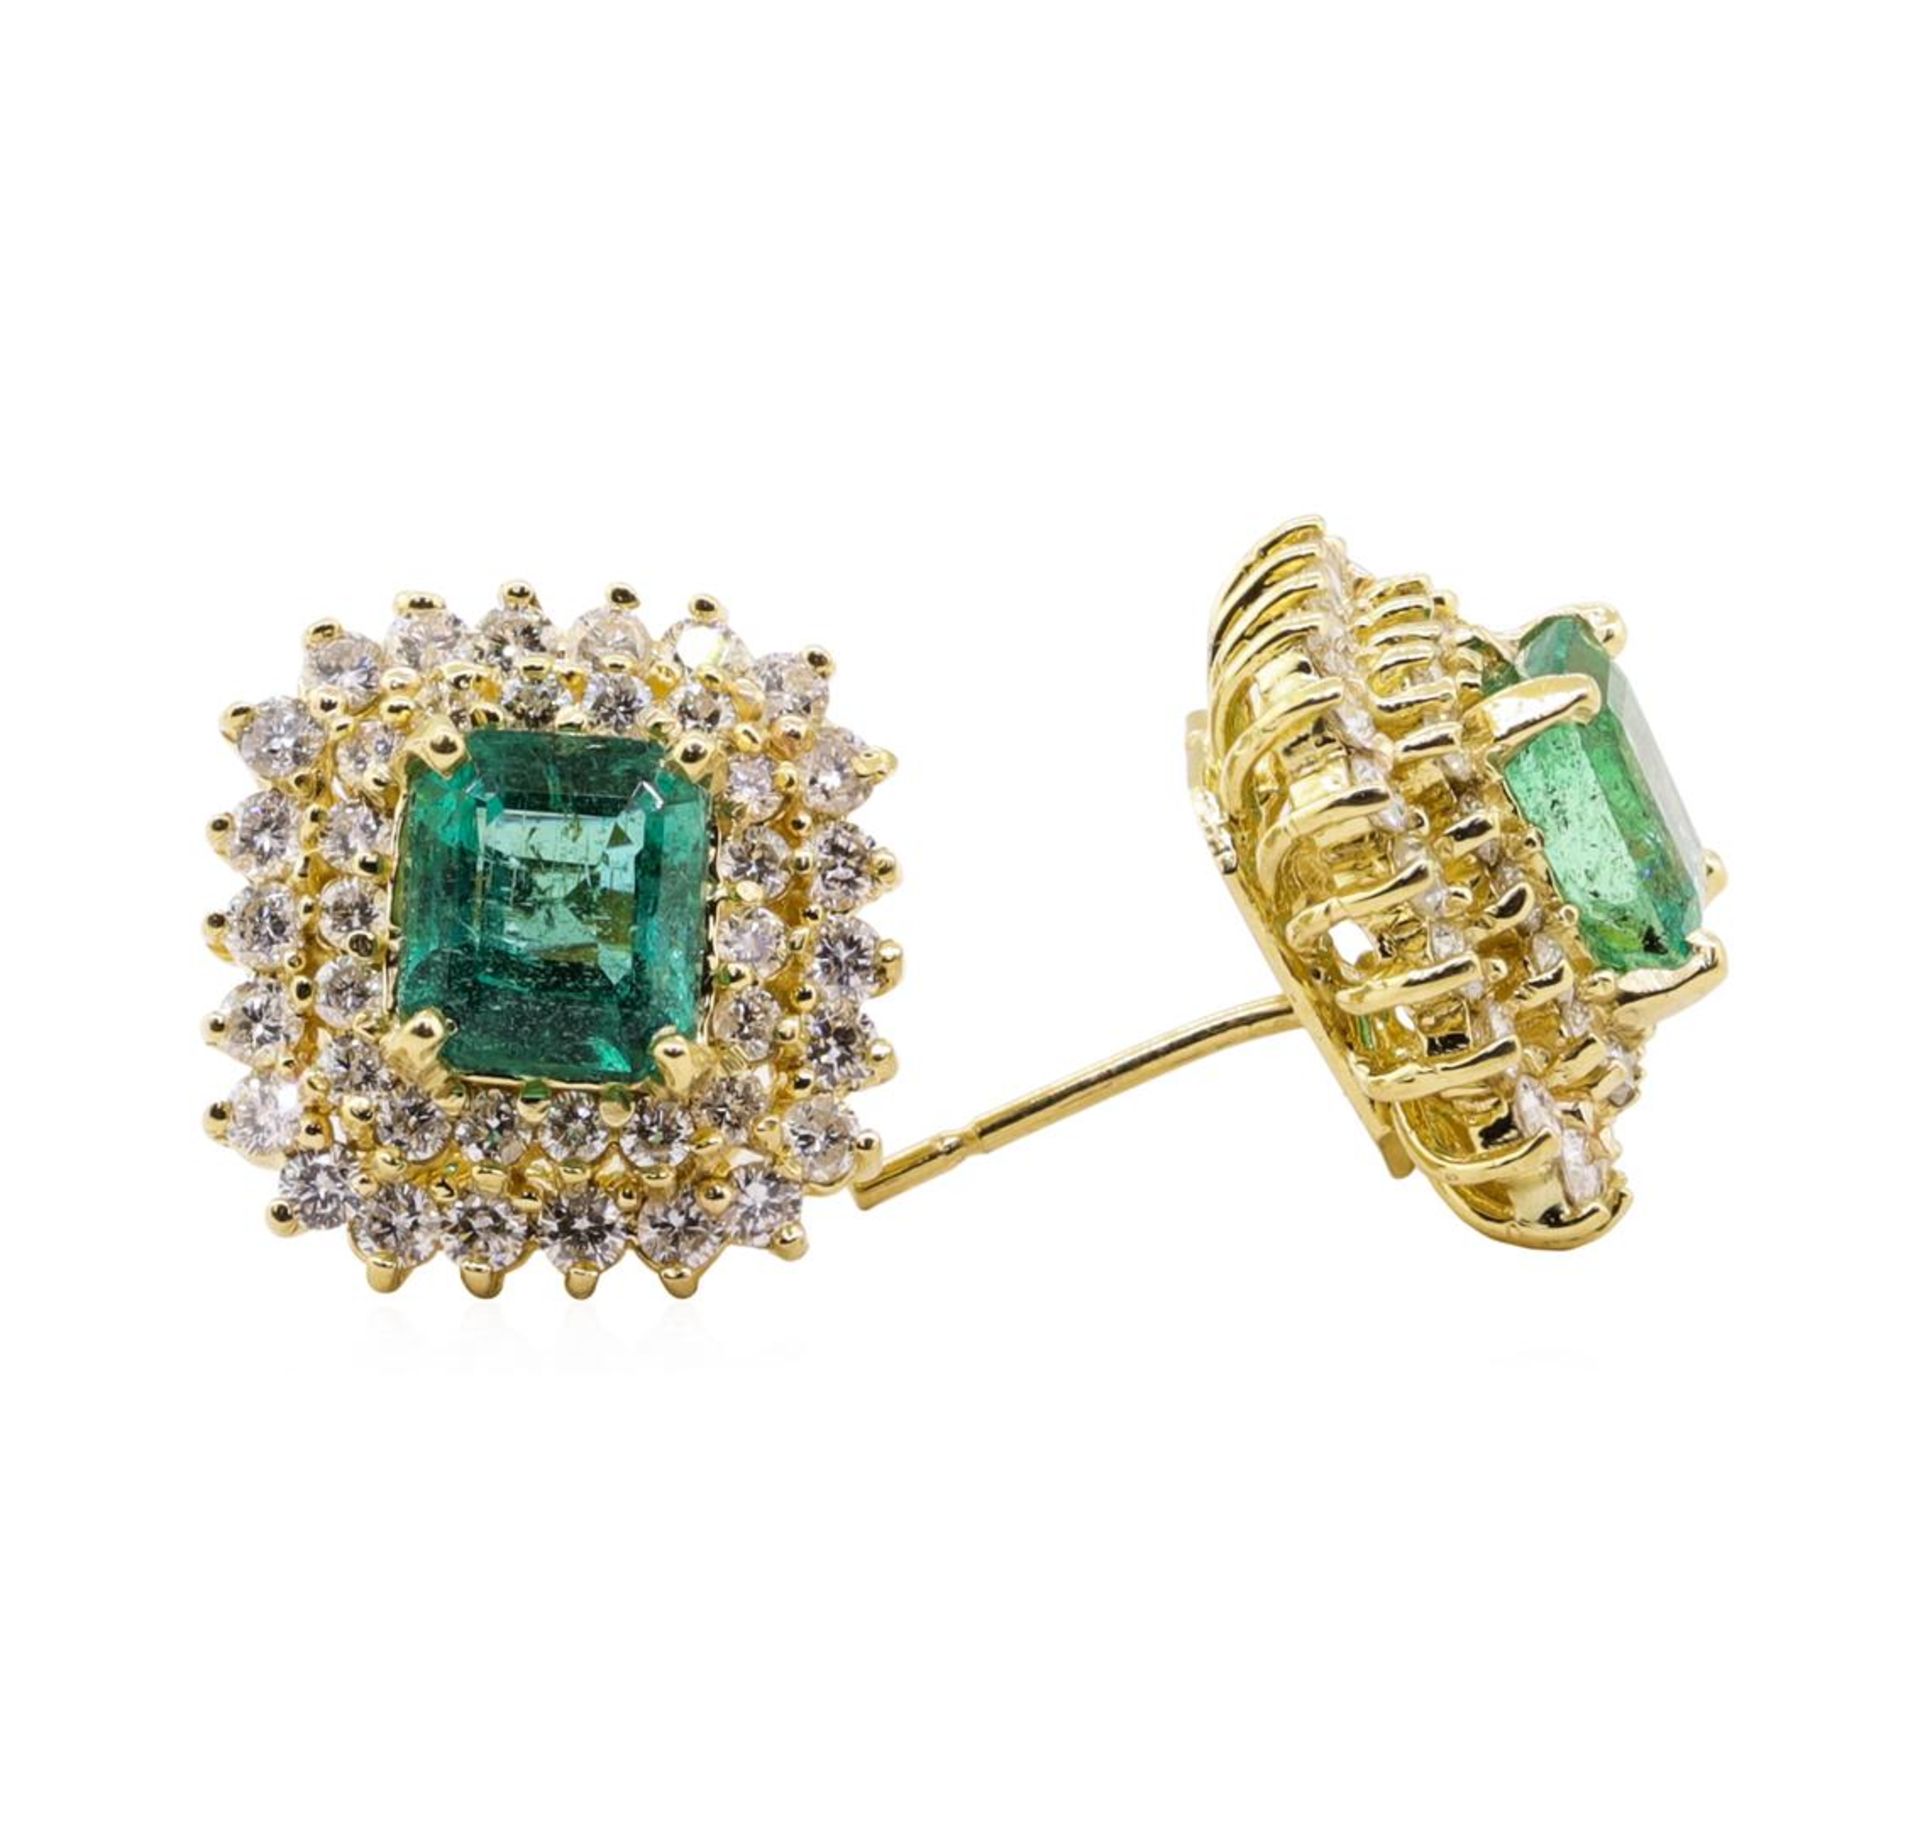 3.71ctw Emerald and Diamond Earrings - 18KT Yellow Gold - Image 2 of 3